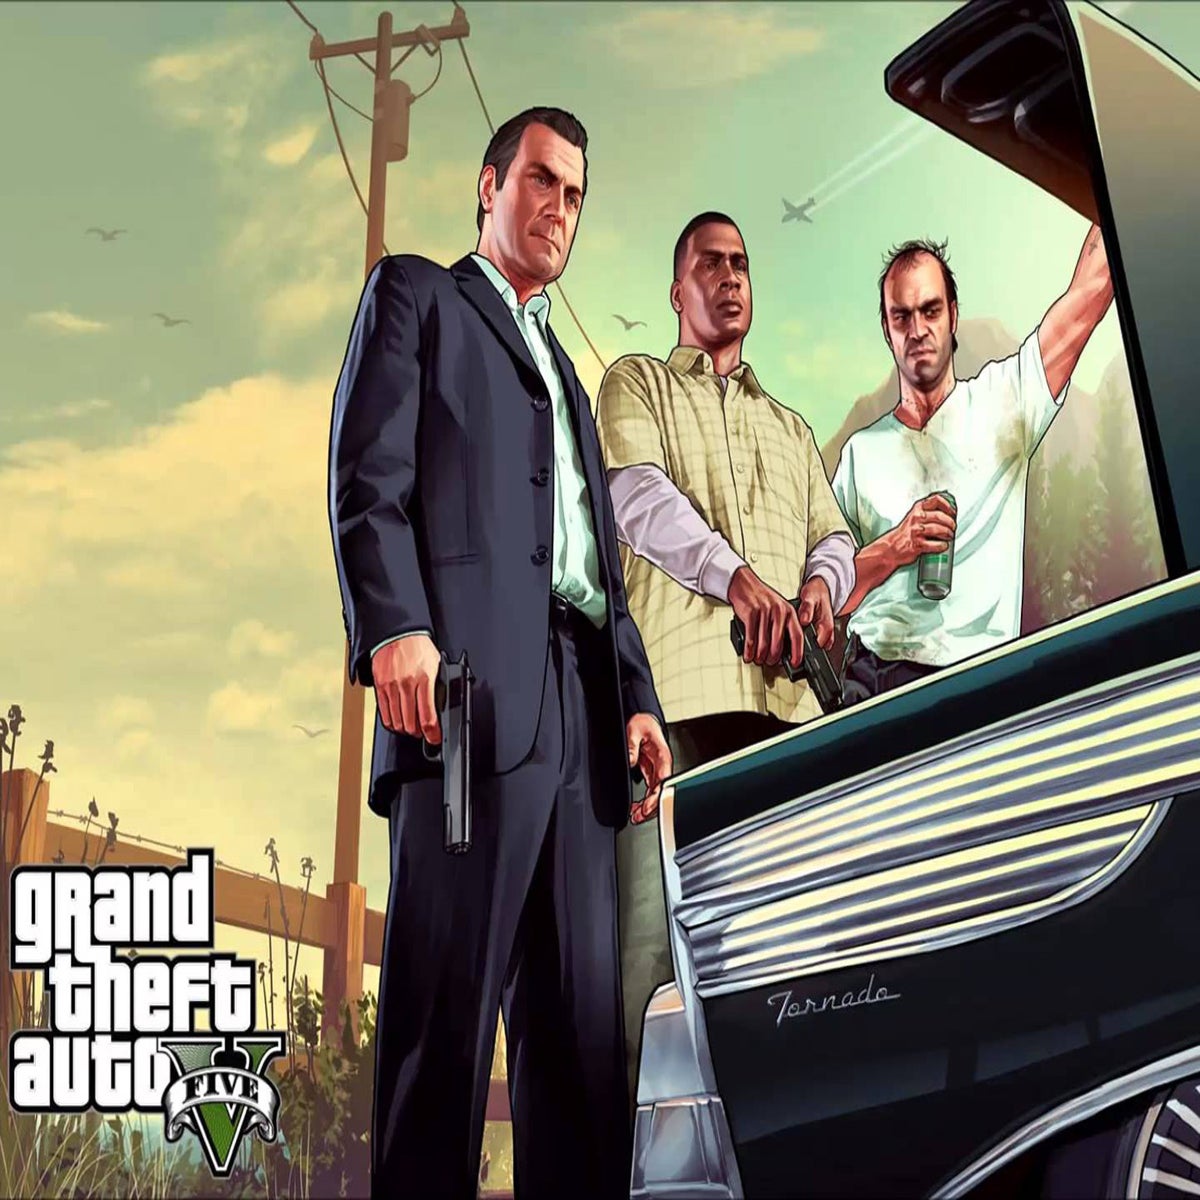 Grand Theft Auto free download crashes Epic Games store - BBC News